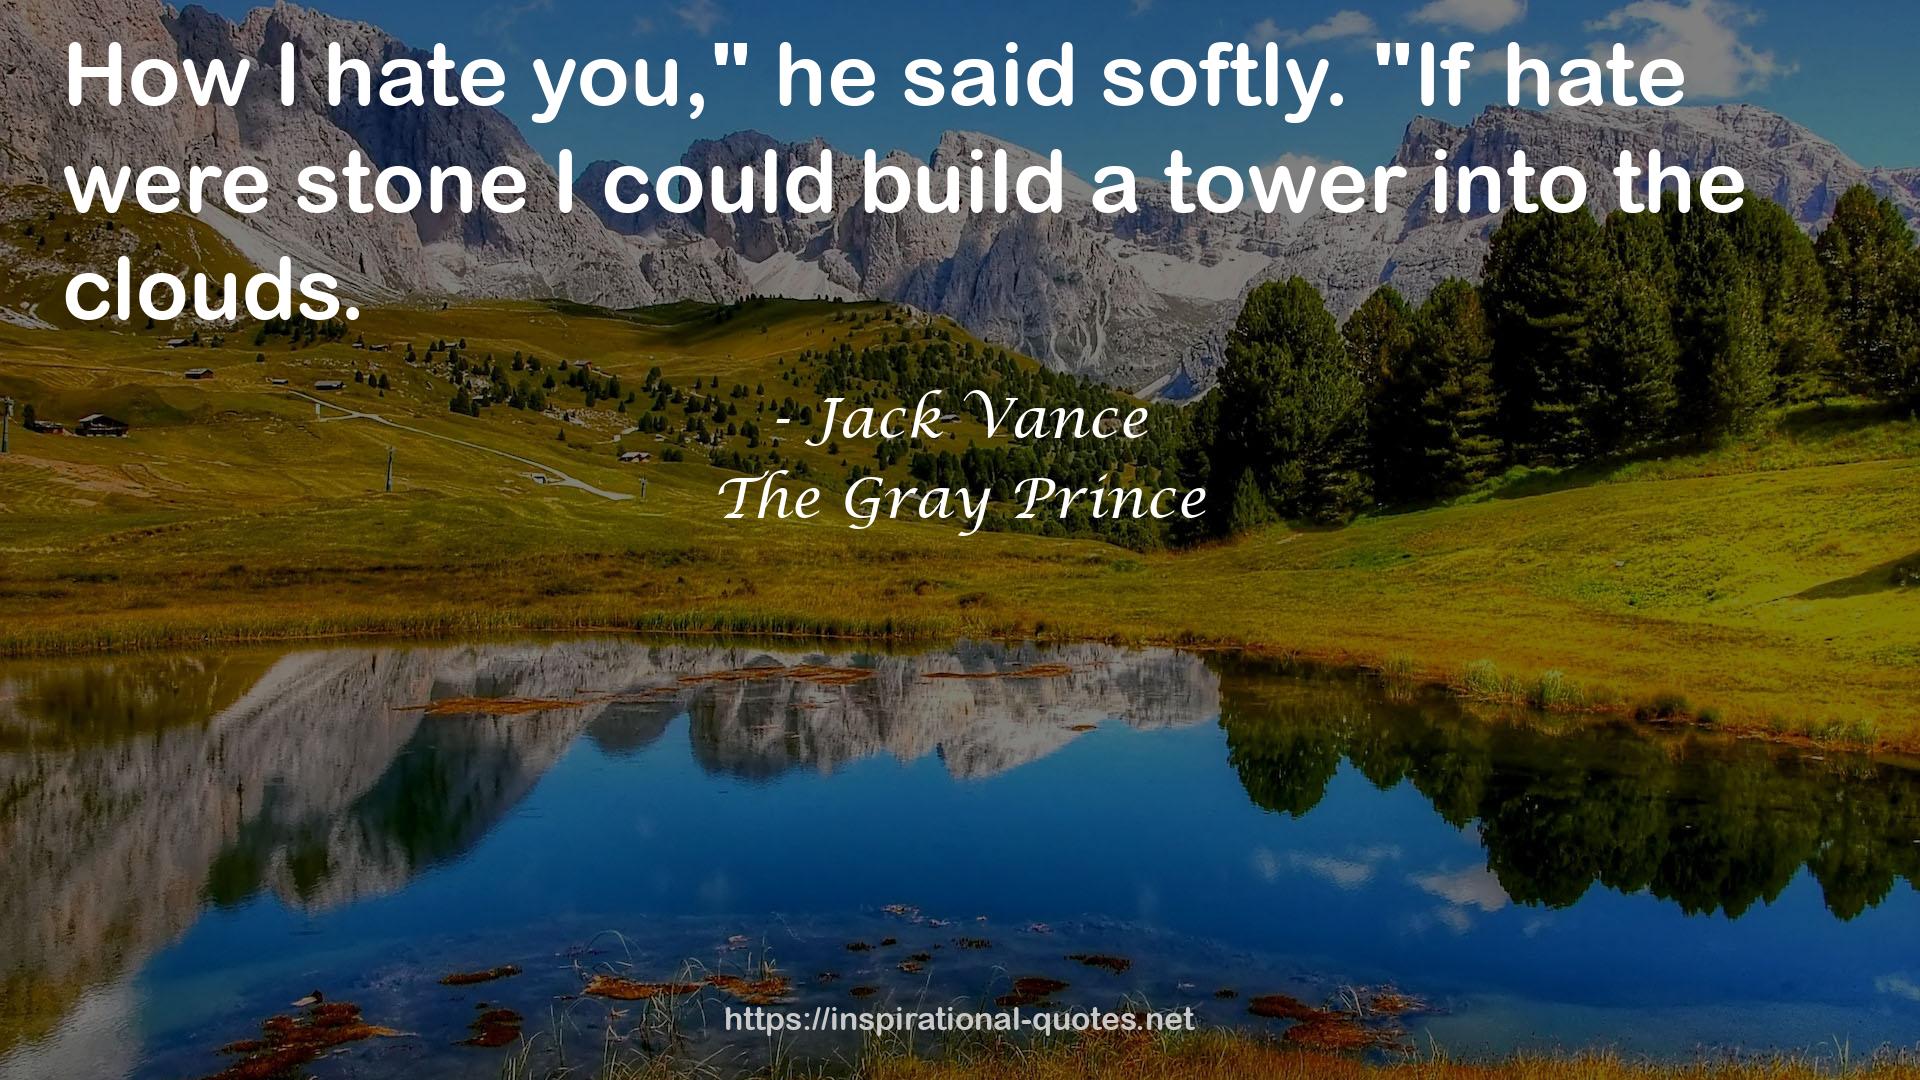 The Gray Prince QUOTES